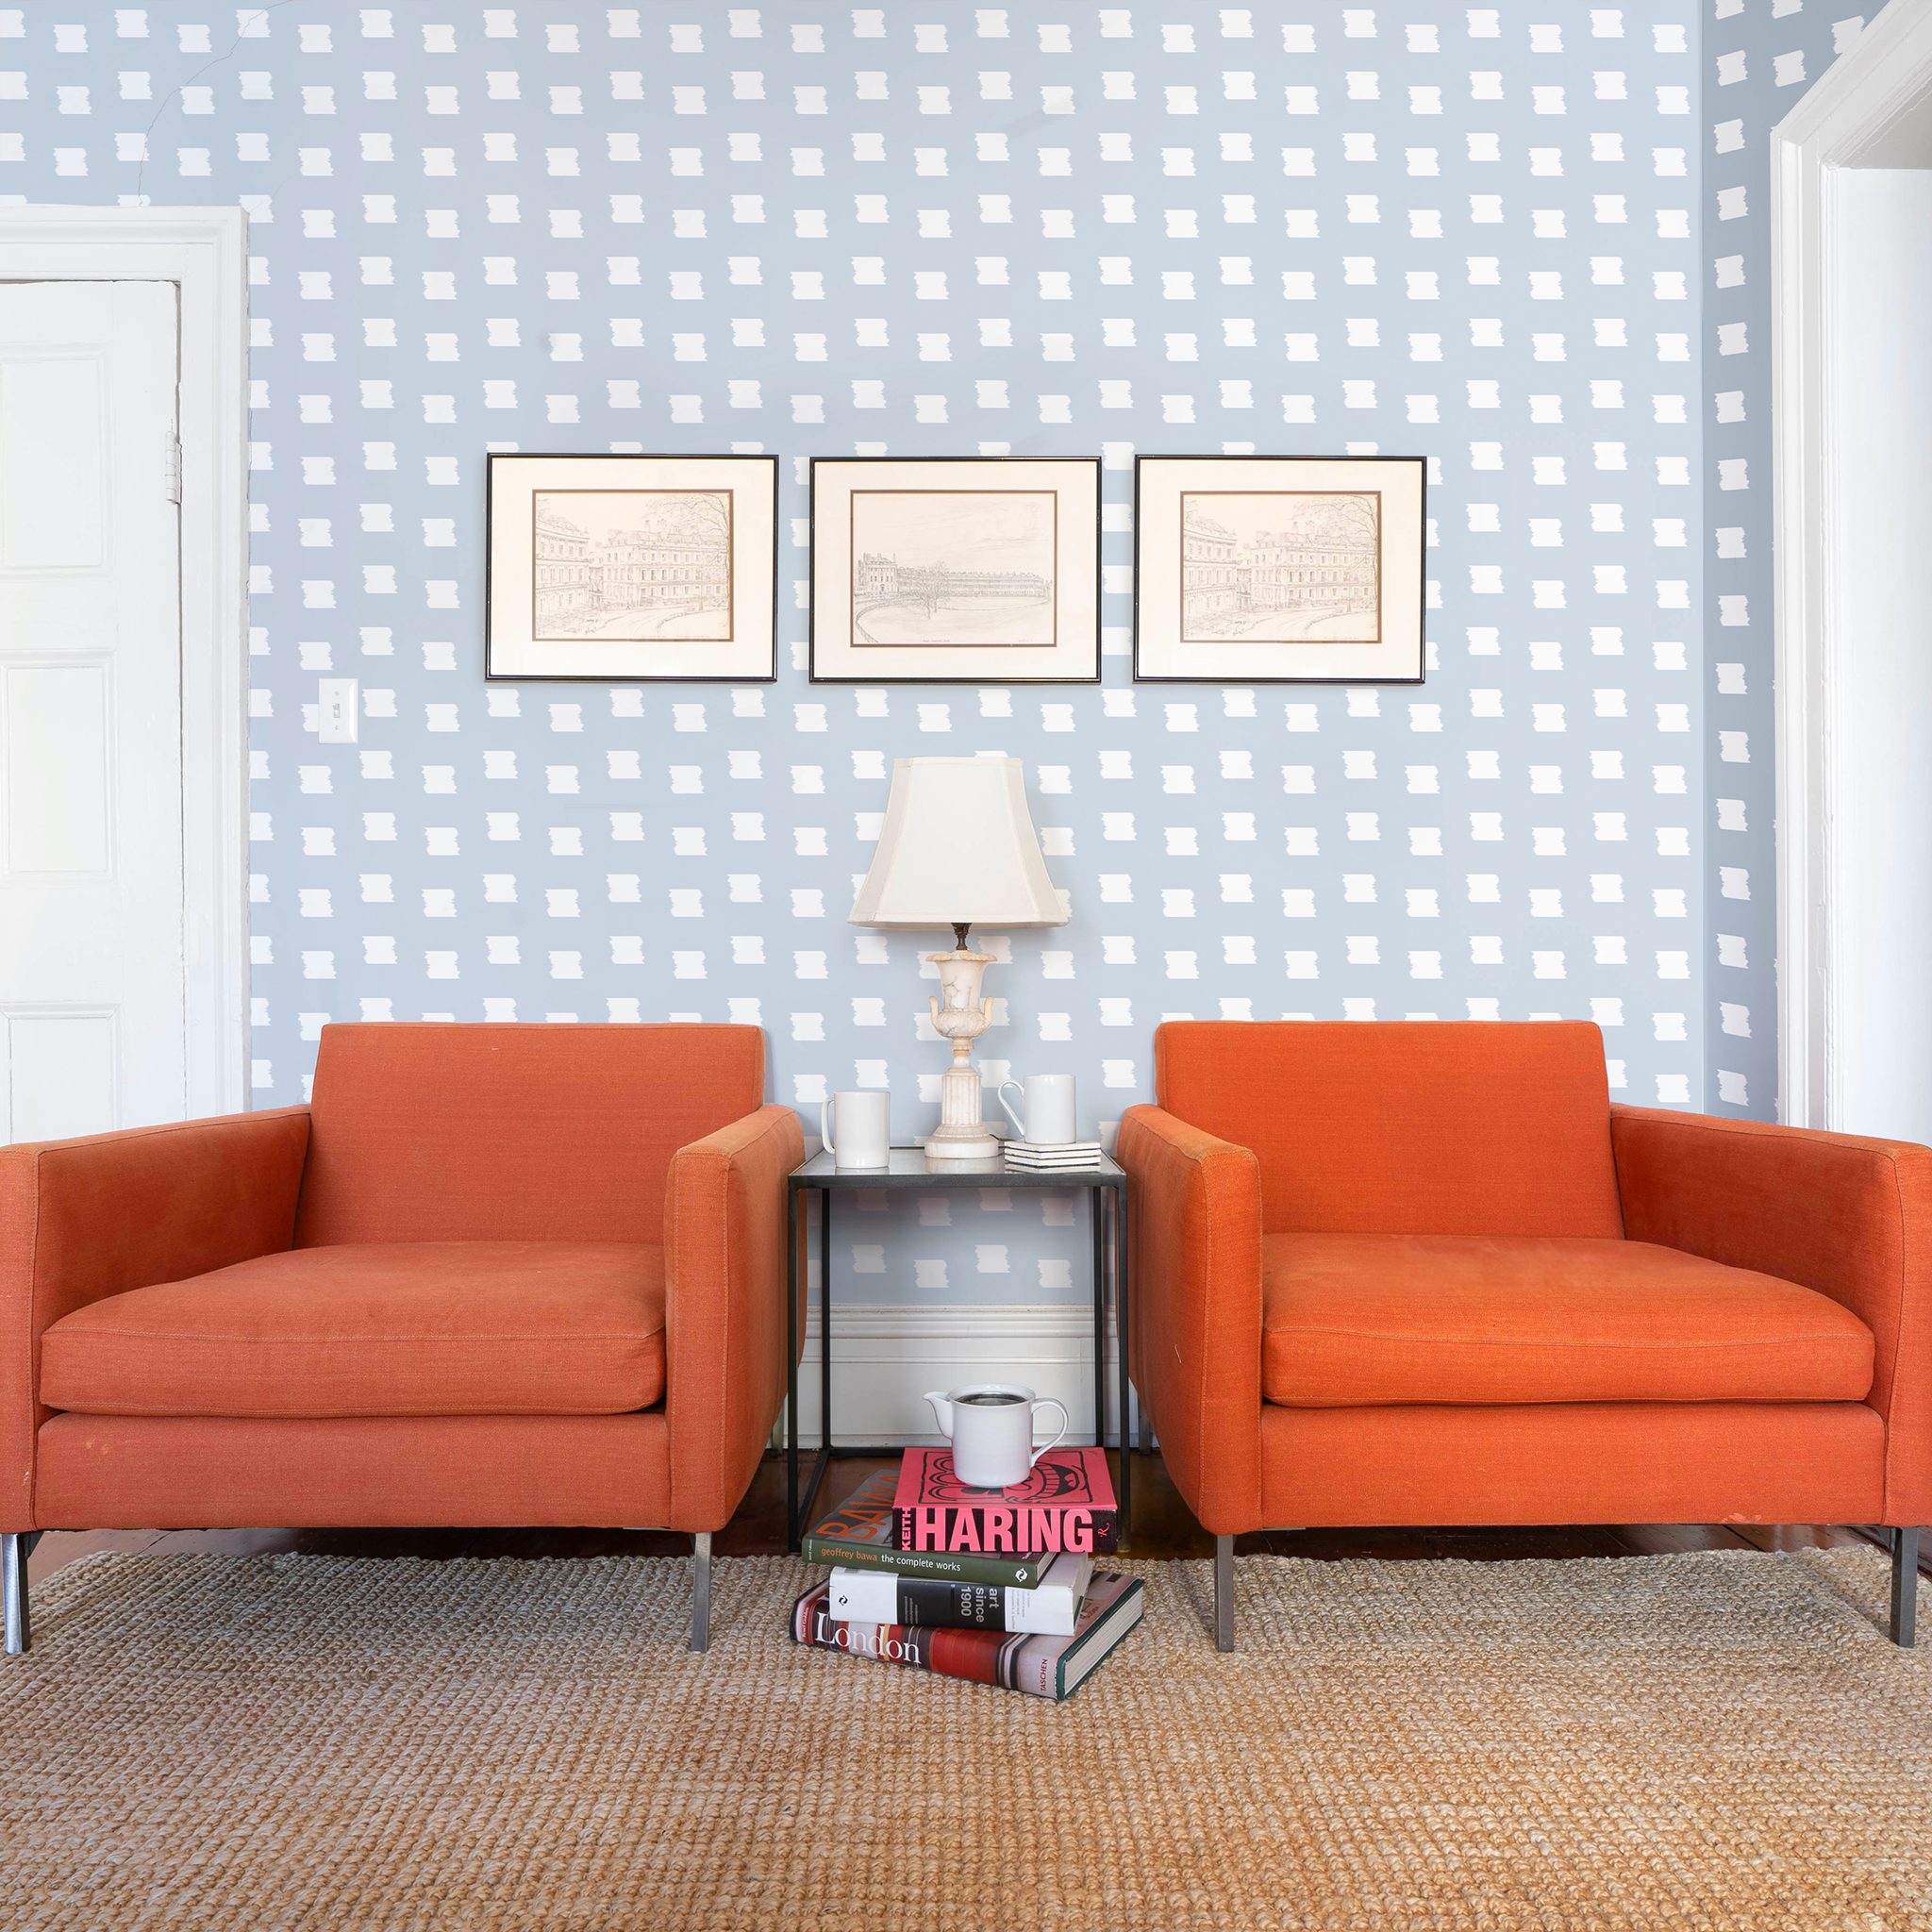 Living room styled with Sky Blue Pattern Printed Wallpaper and three frames over two orange sofa couches with white lamp and decorations on table in between them and stacked books on a light brown rug